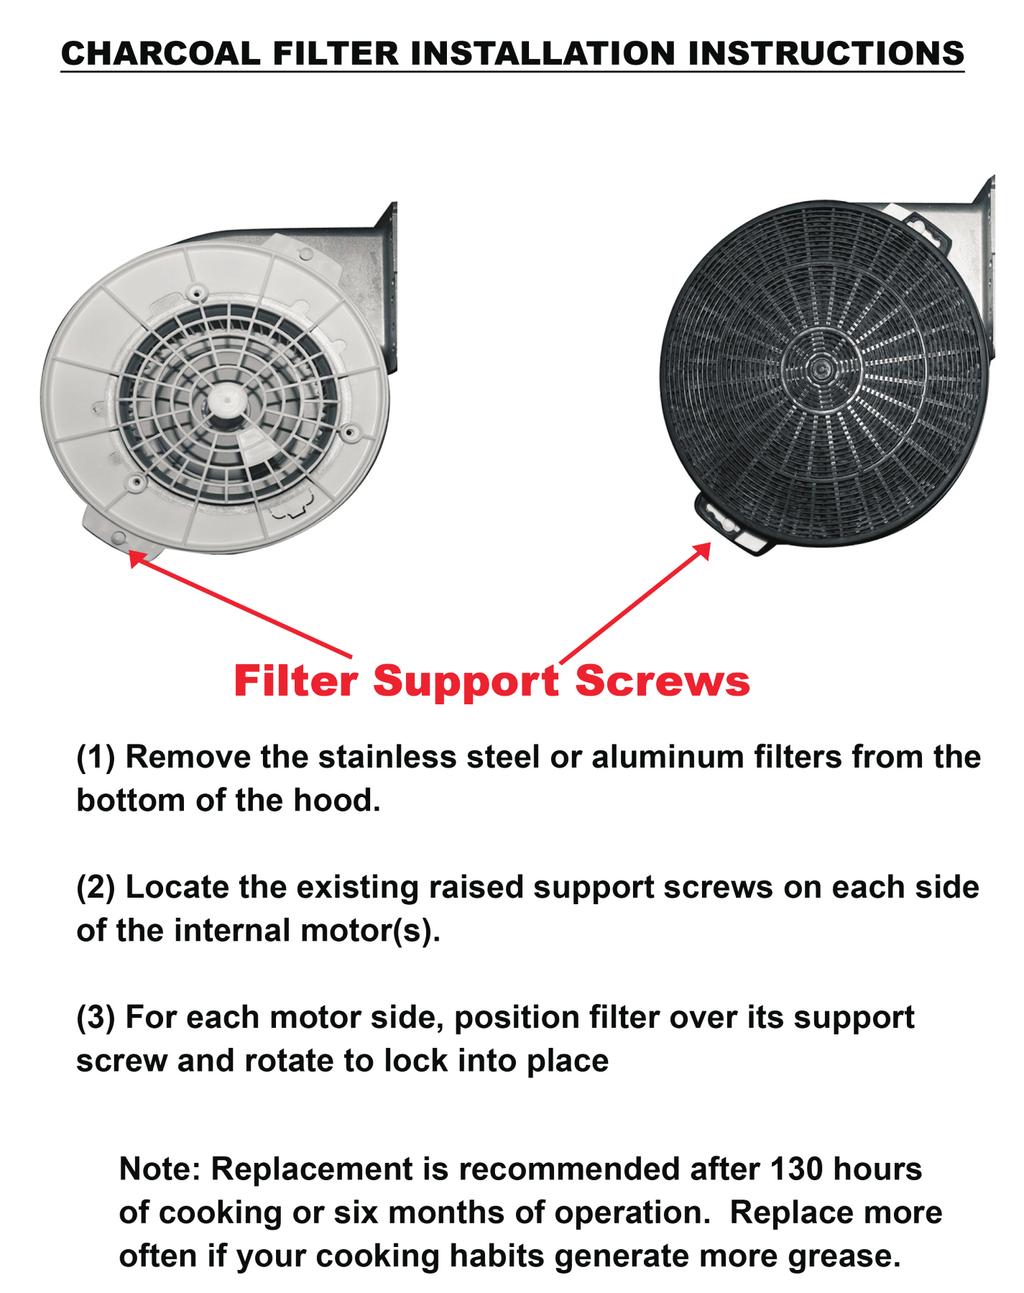 How To Change or Replace Parts Filter Installations Replace or Change Charcoal Filters: Installation Tutorial Video It is recommended to direct vent the hood whenever possible.